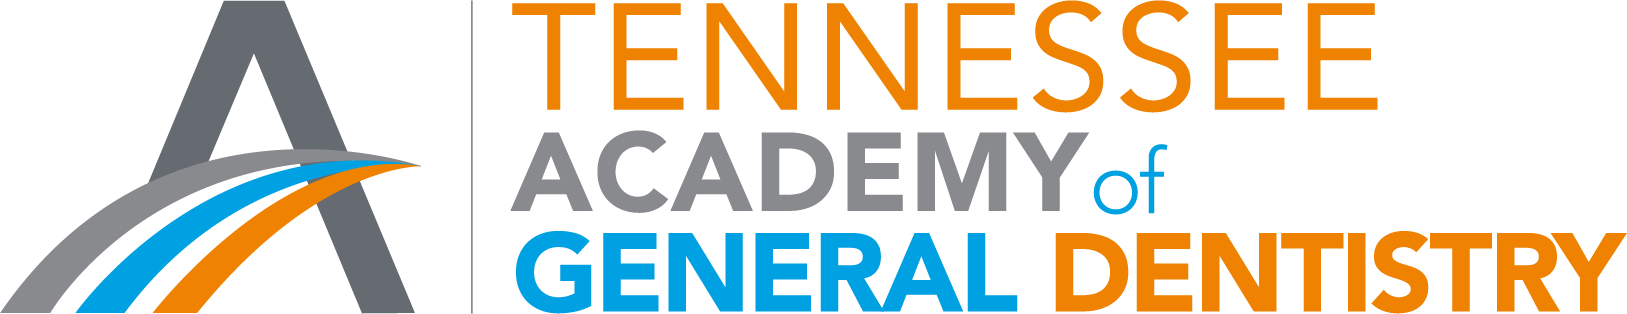 Tennessee Academy of General Dentistry logo